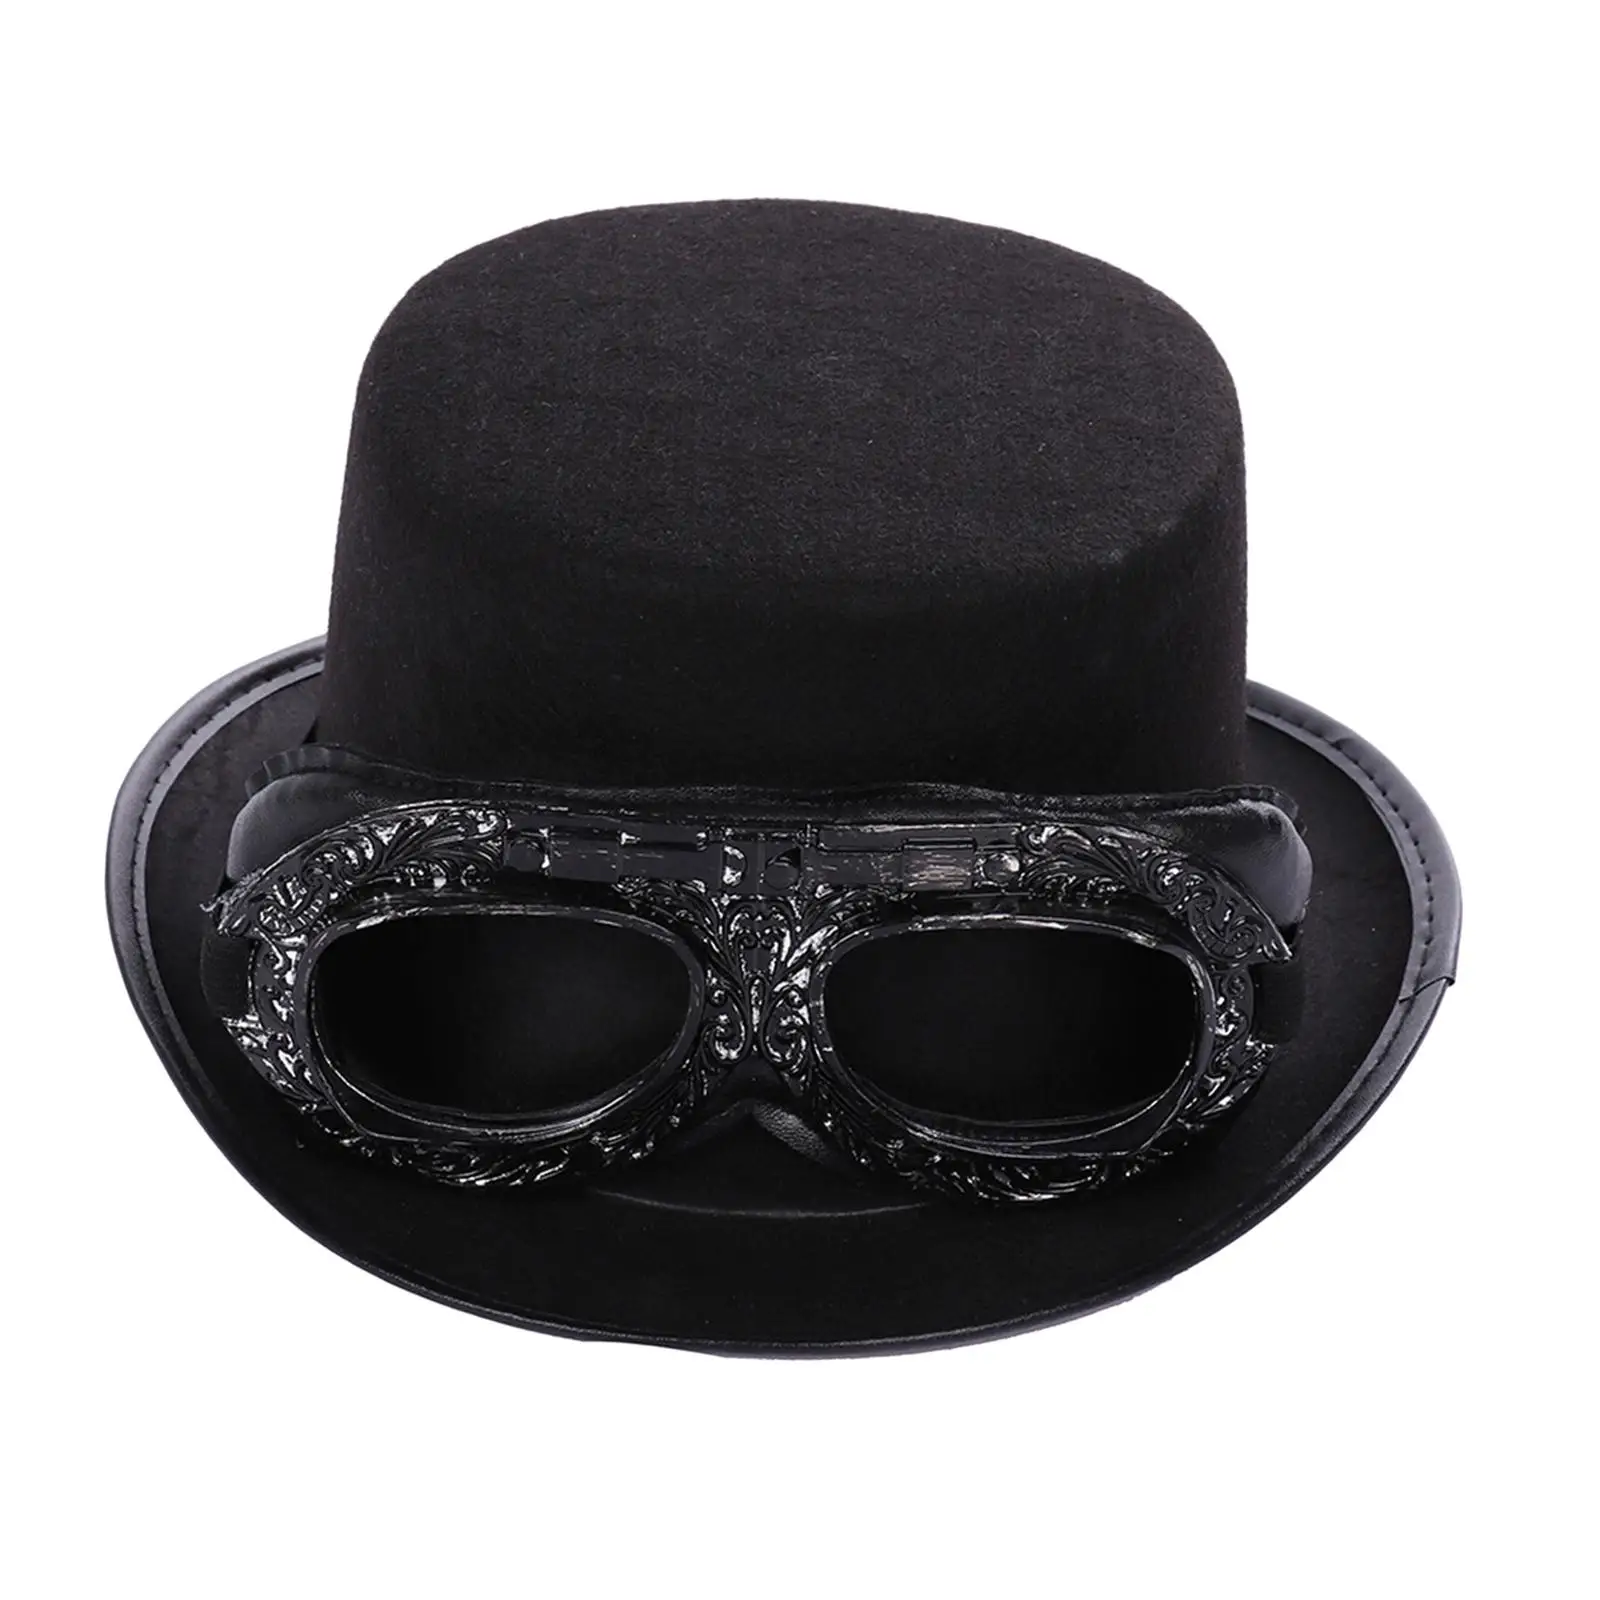 Deluxe Black Steampunk Top Hat with Goggles Costume Top Hat Cosplay Classic Formal Gothic Headgear for Unisex Dress Party